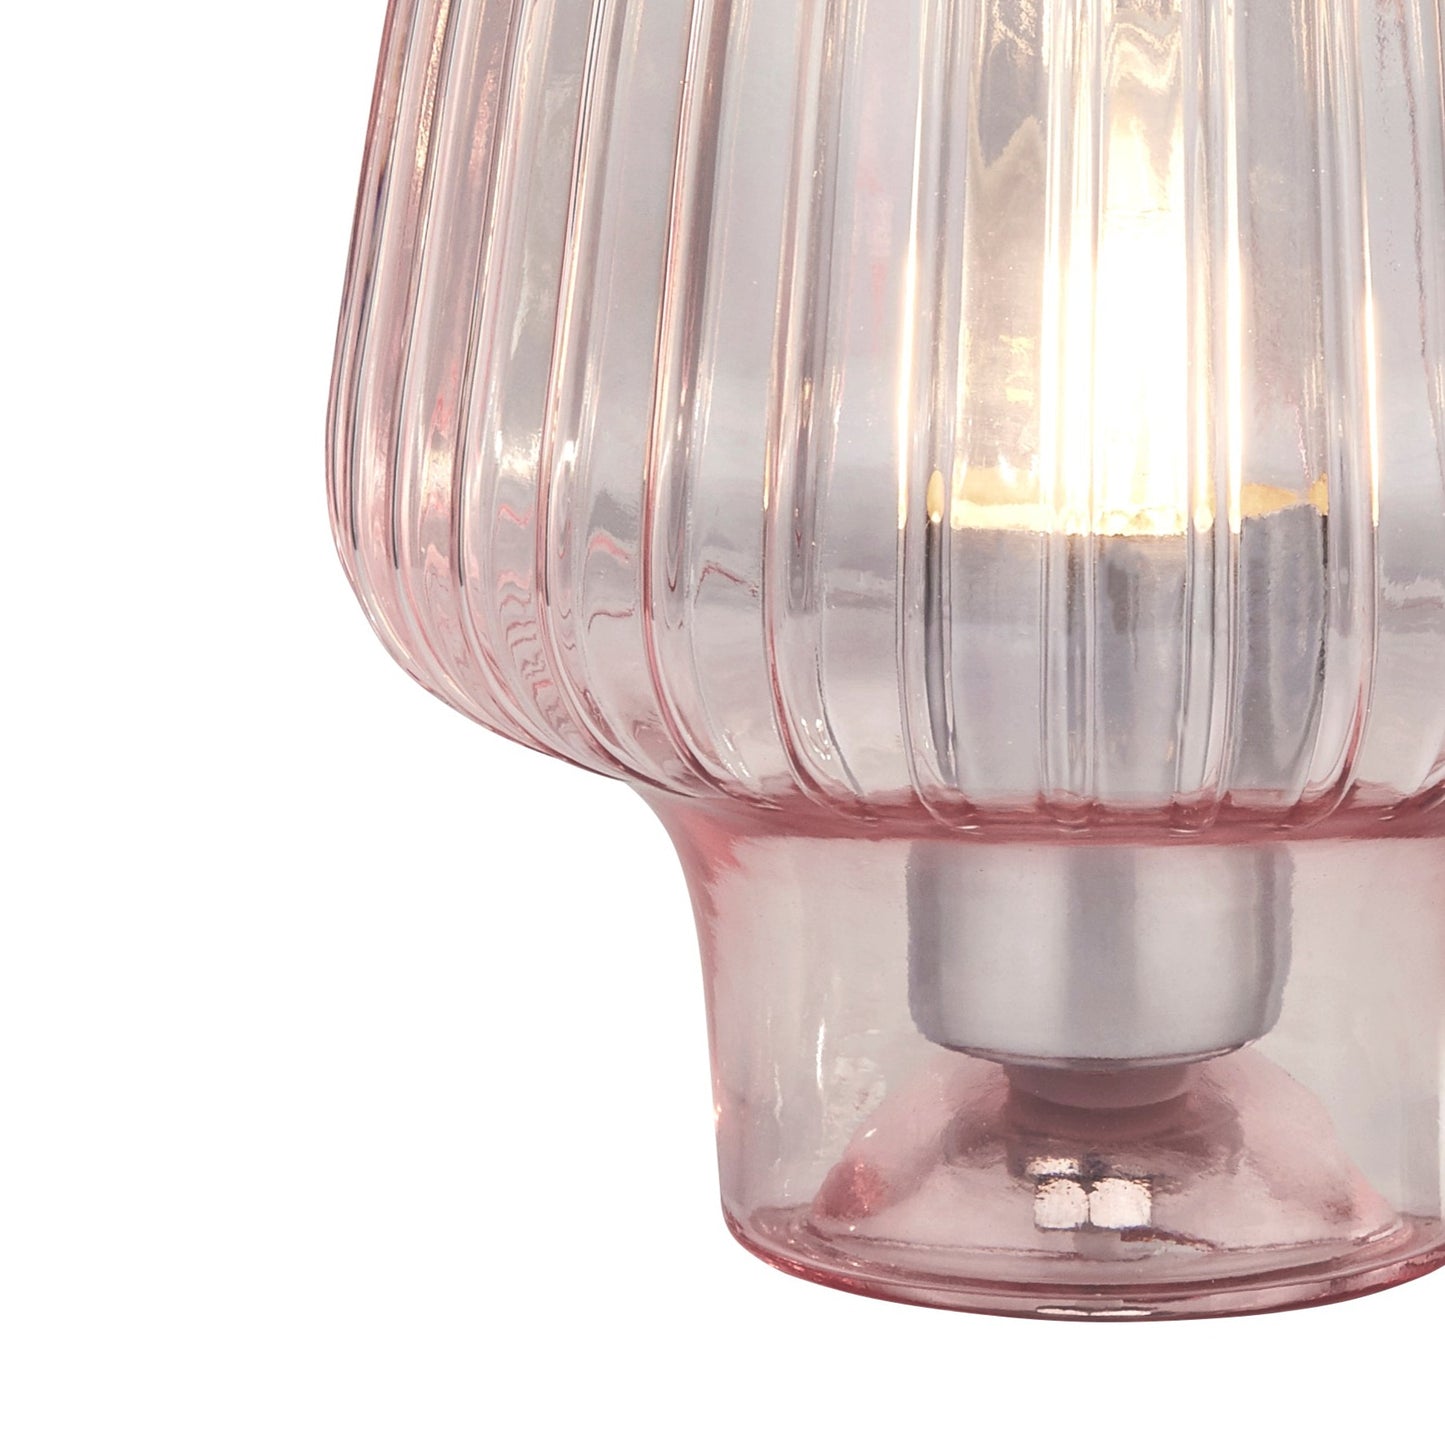 Our Rosie table lamp is made from a beautiful shade of pink rose glass will really catch the eye as the light cascades through the ribbed glass detailing of this table lamp. This light is perfect for bedrooms, girls decor, side tables, coffee tables and dressing tables to add elegance and a touch of class. 